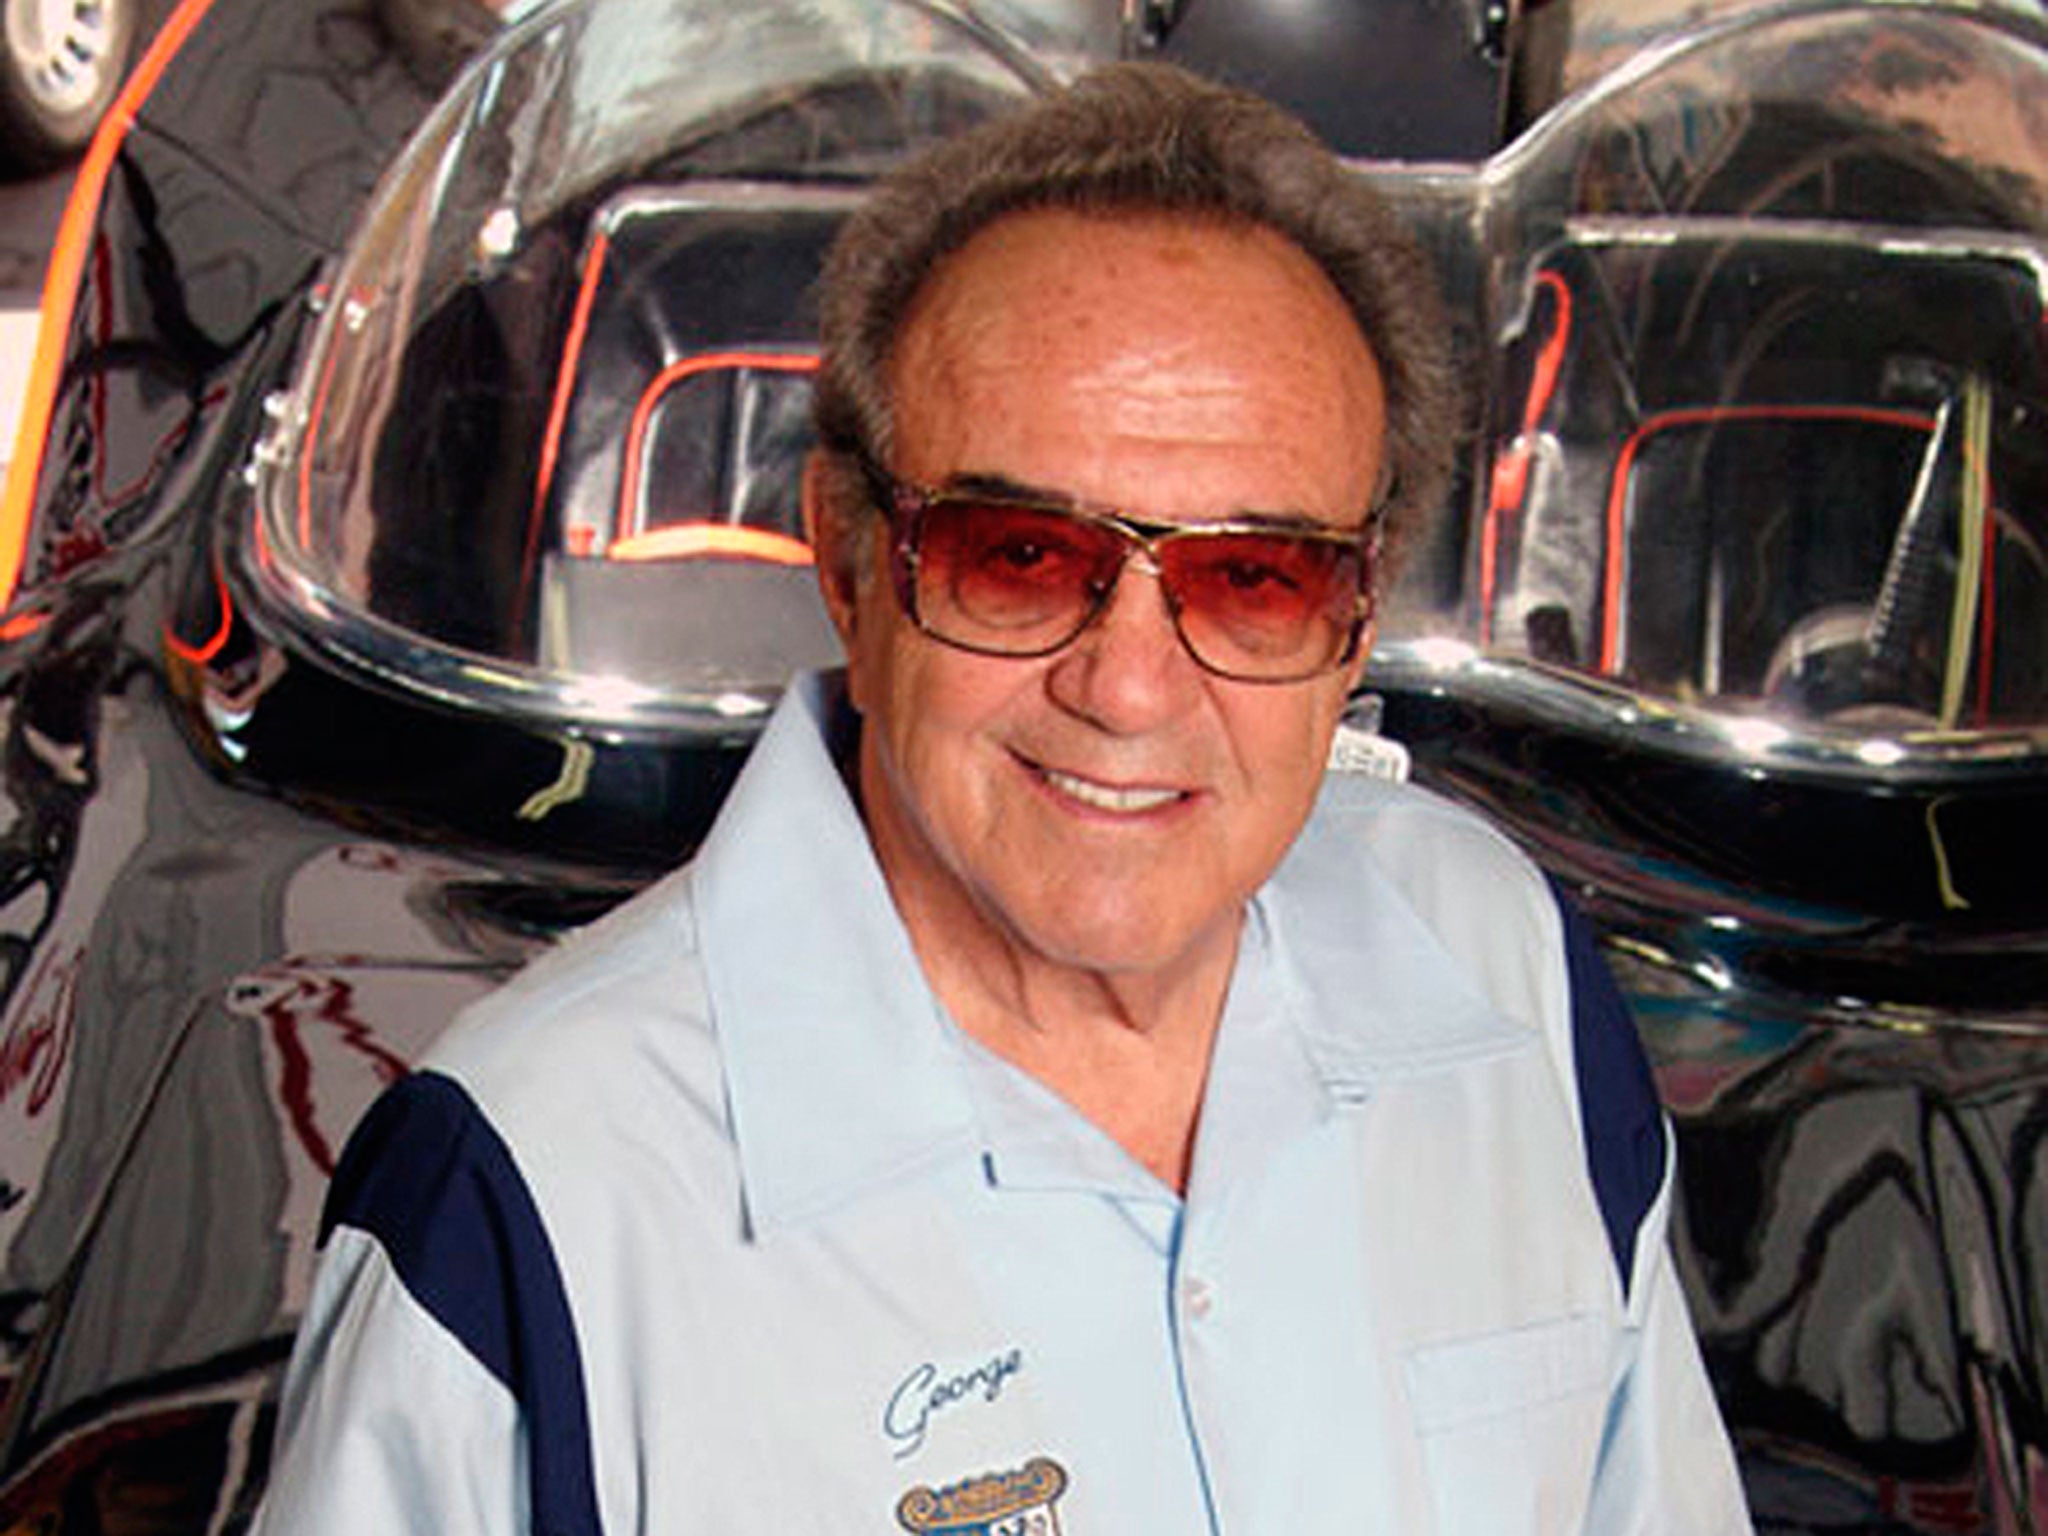 In this 2007 photo, George Barris stands by the 1966 Batmobile that he designed at Barris Kustom Studios in North Hollywood, Calif. Barris, who created television's original Batmobile, along with scores of other beautifully customized, instantly recognizable vehicles that helped define California car culture, has died at age 89